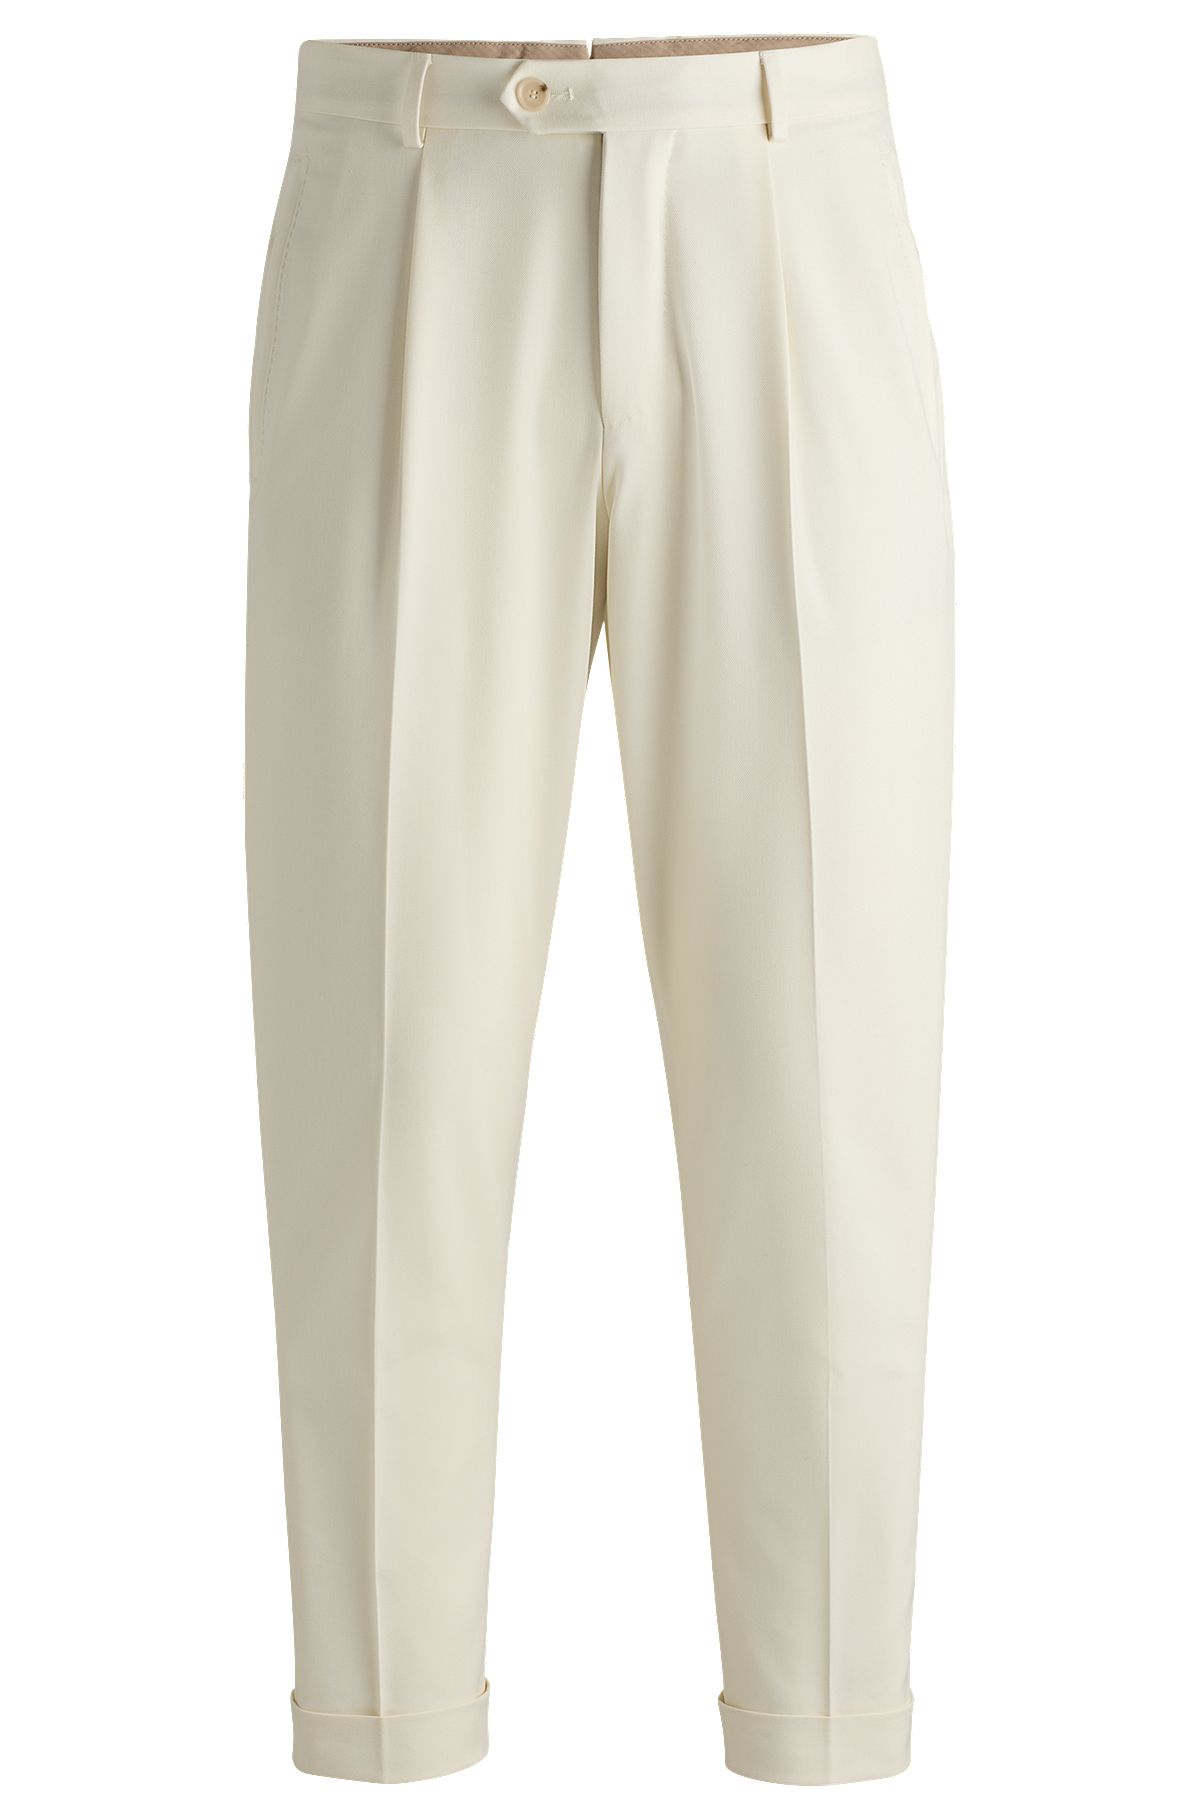 Relaxed-fit trousers in cotton, virgin wool and stretch, White